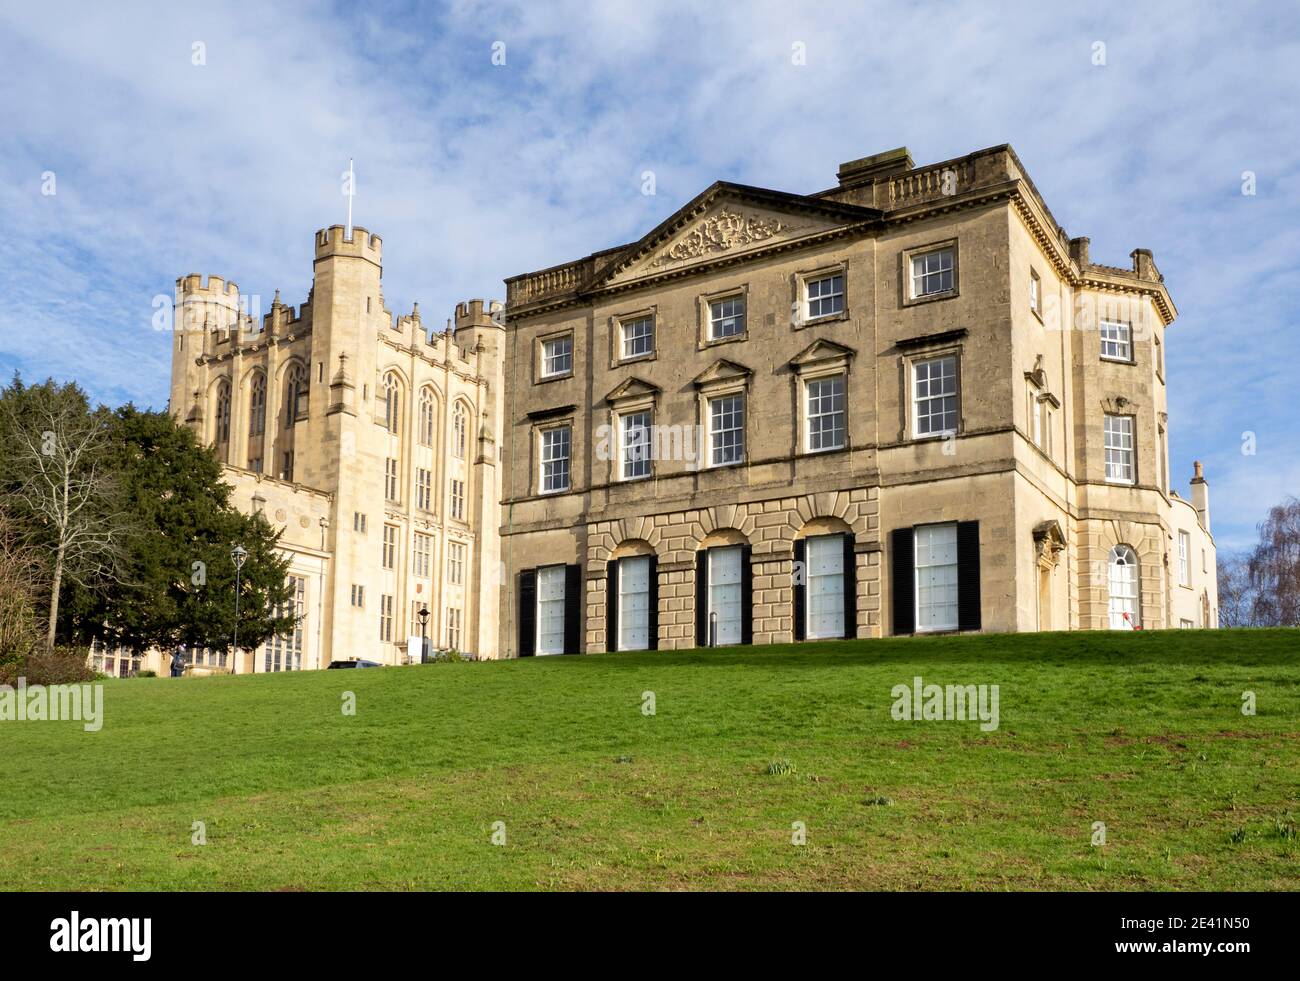 Royal Fort House and the fortress-like Physics Building at Royal Fort Gardens in the University of Bristol UK Stock Photo